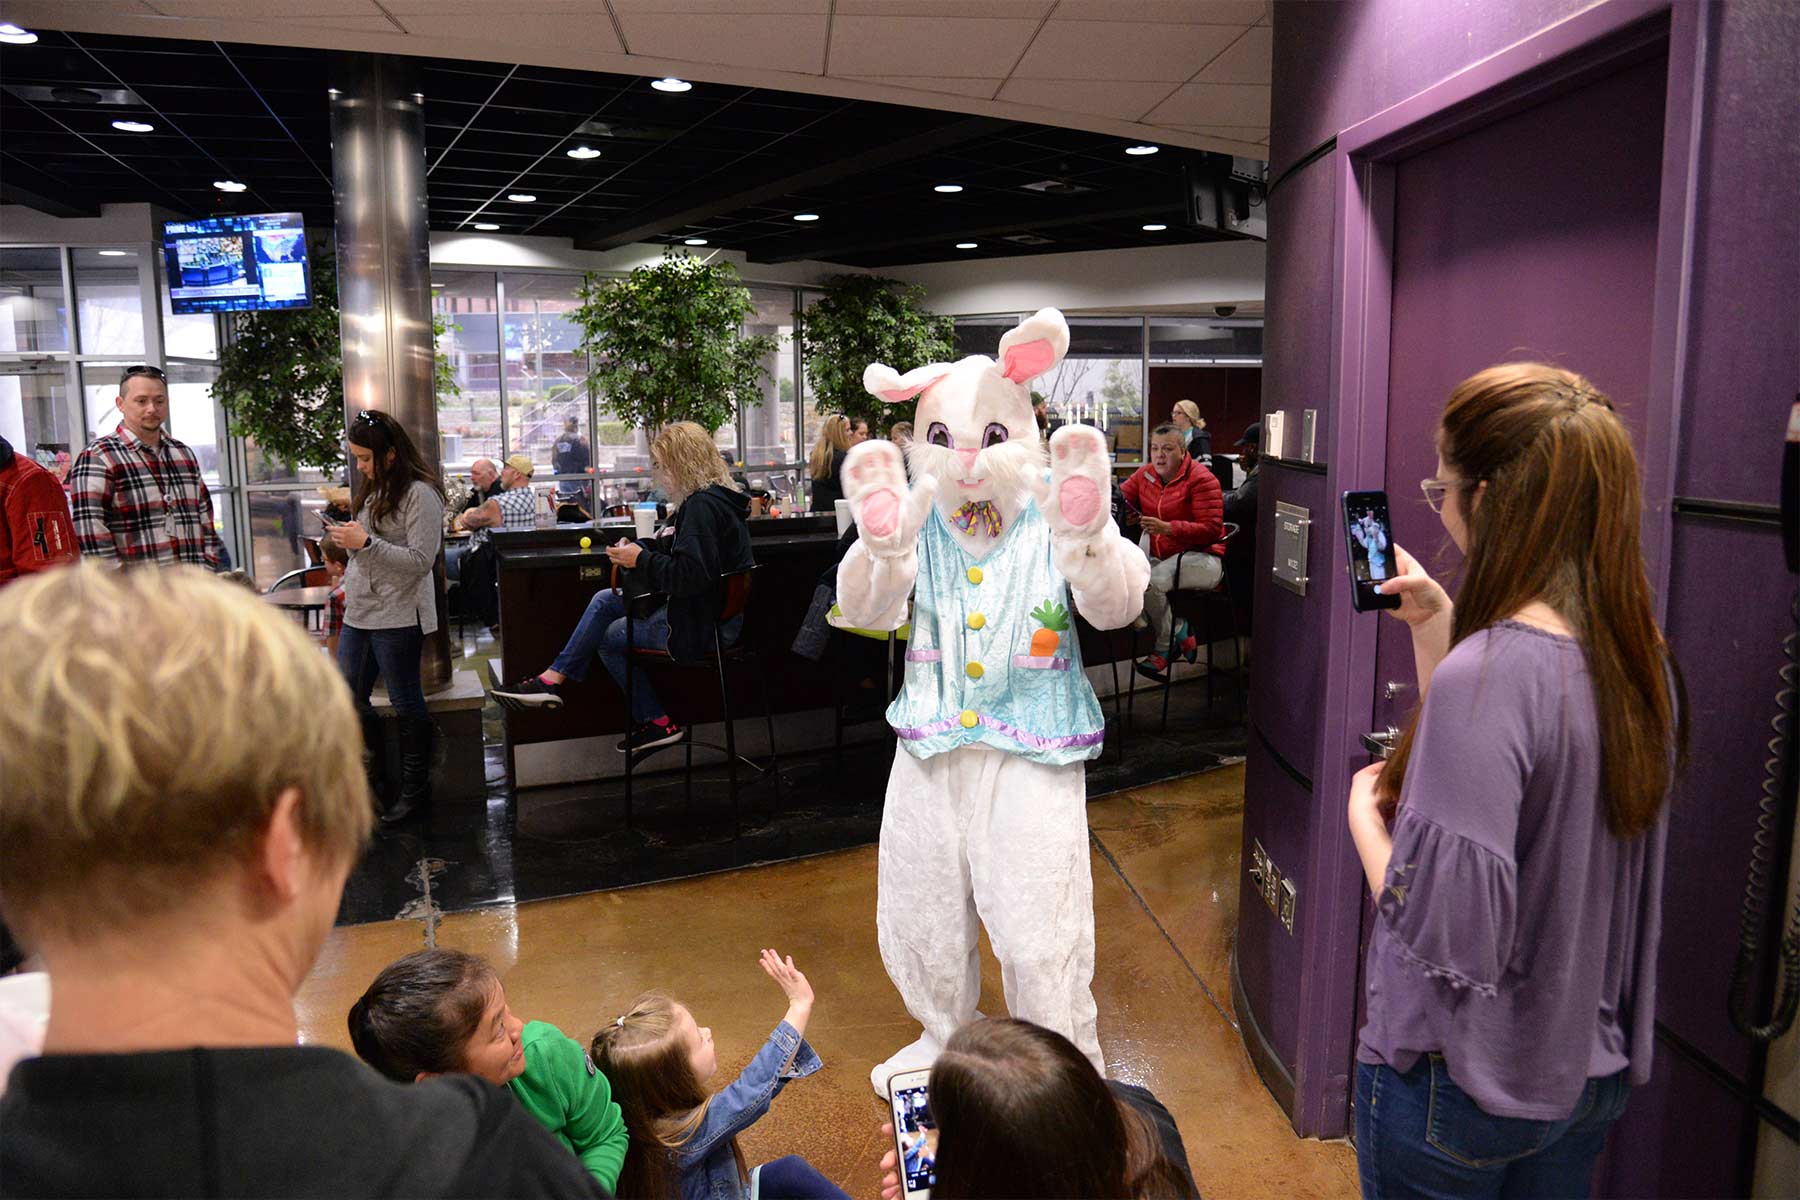 The Easter bunny greeting children and their parents during Prime Inc.'s annual Easter Egg Hunt.